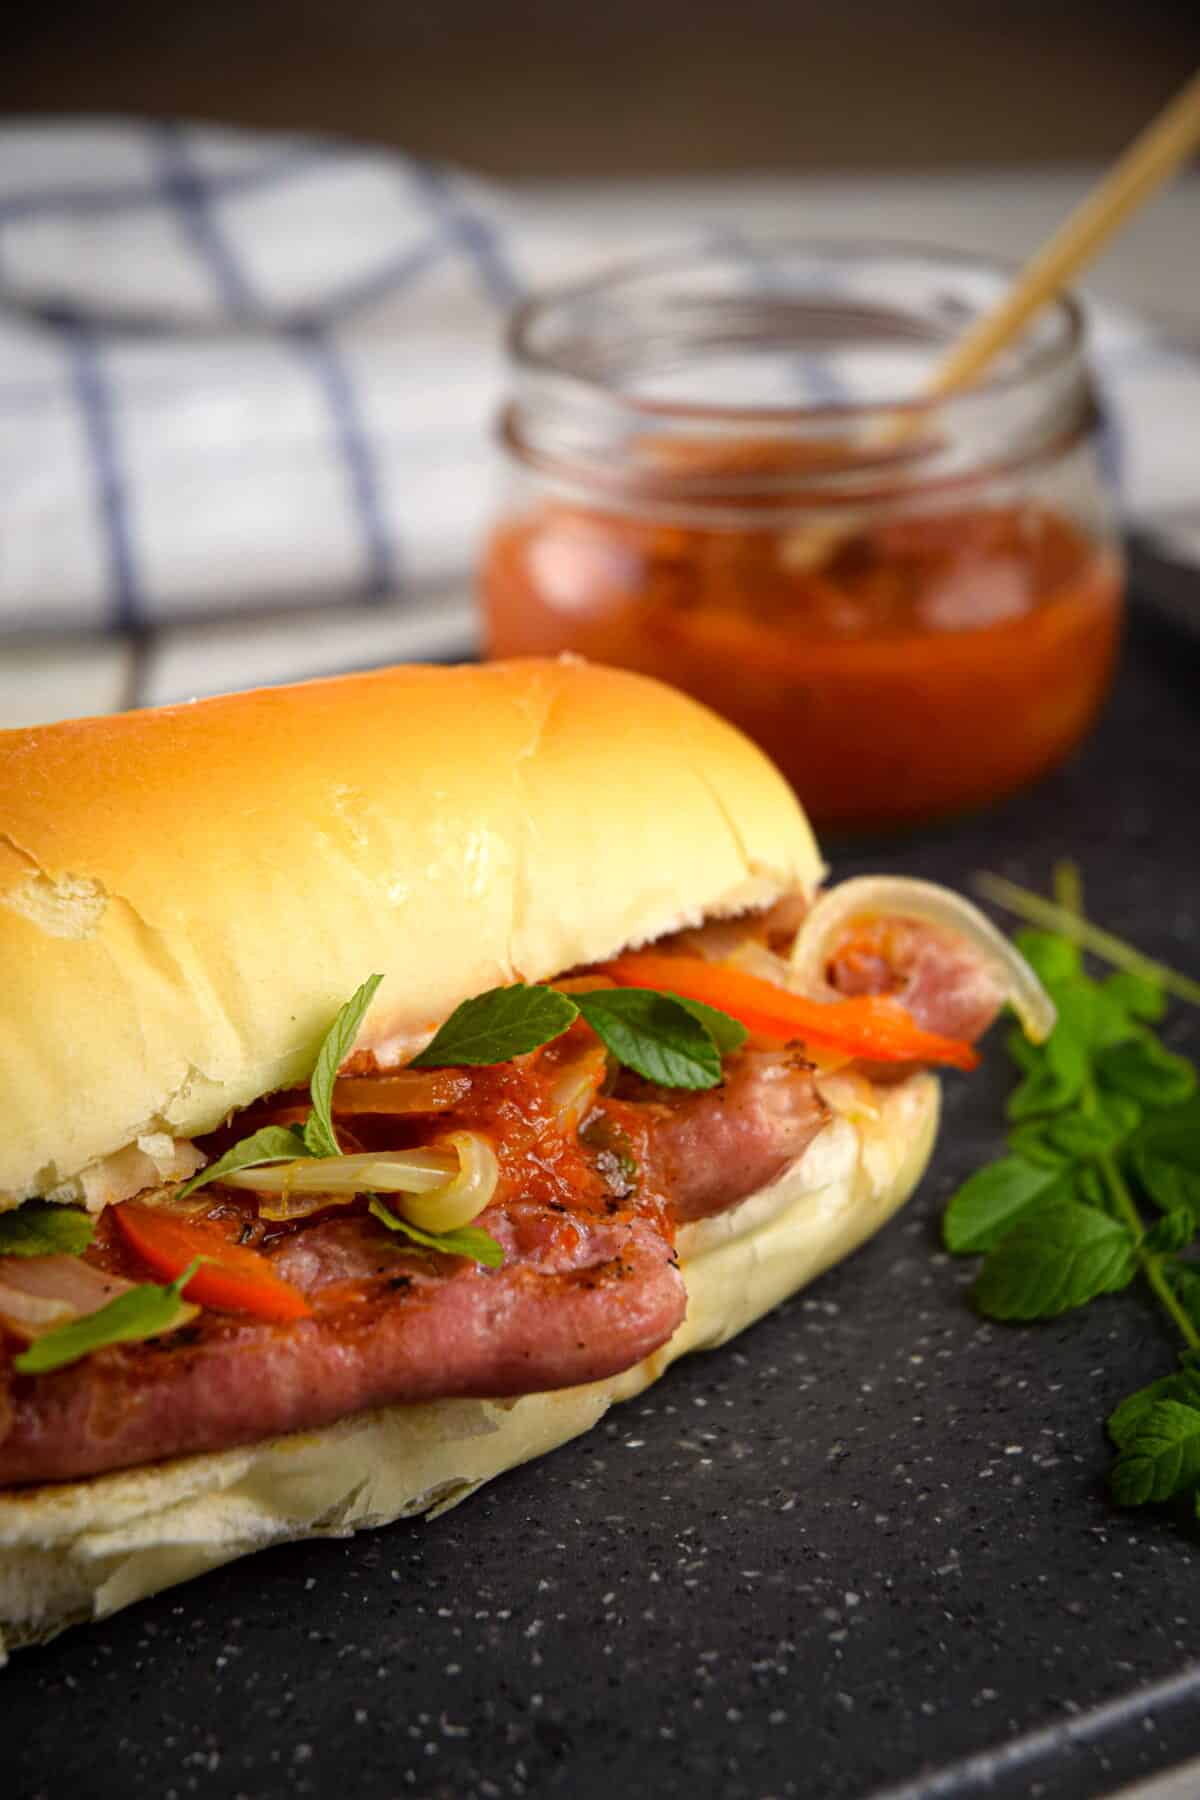 Italian sausage sandwich with fresh oregano and a jar of pepper sauce.